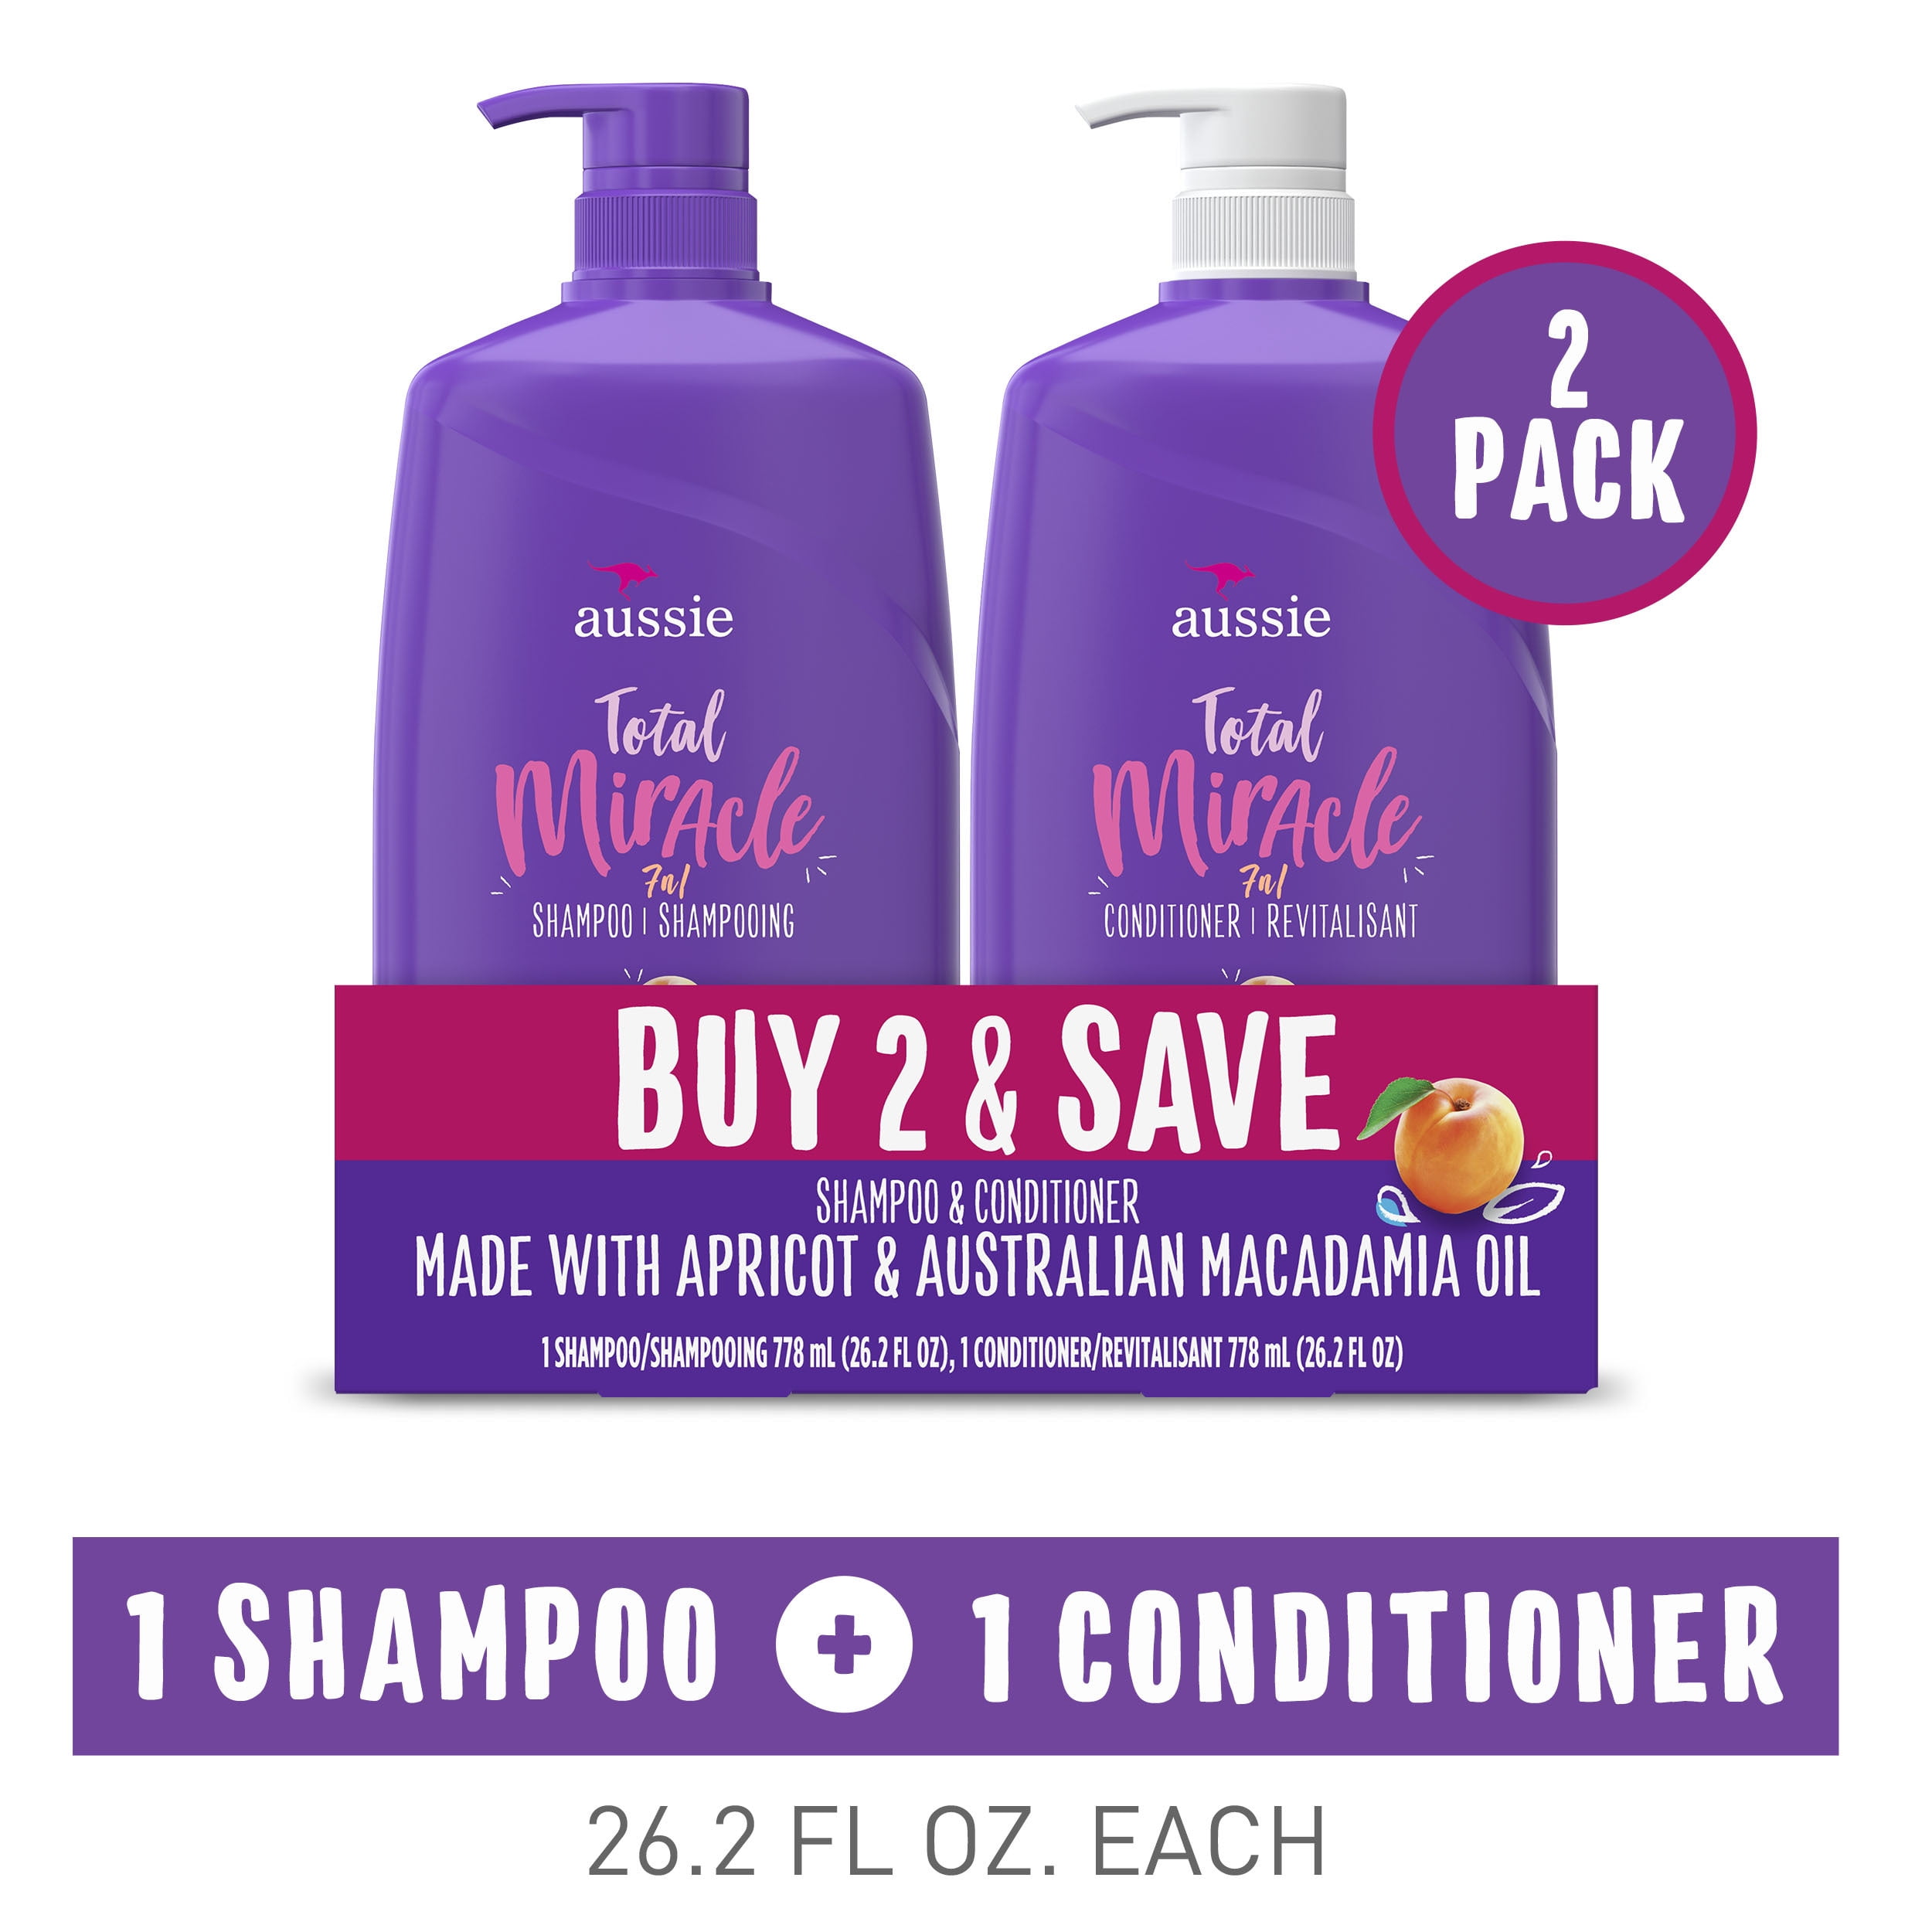 Aussie Total Miracle with Apricot & Macadamia Oil, Paraben Free Shampoo and Conditioner Twin Pack